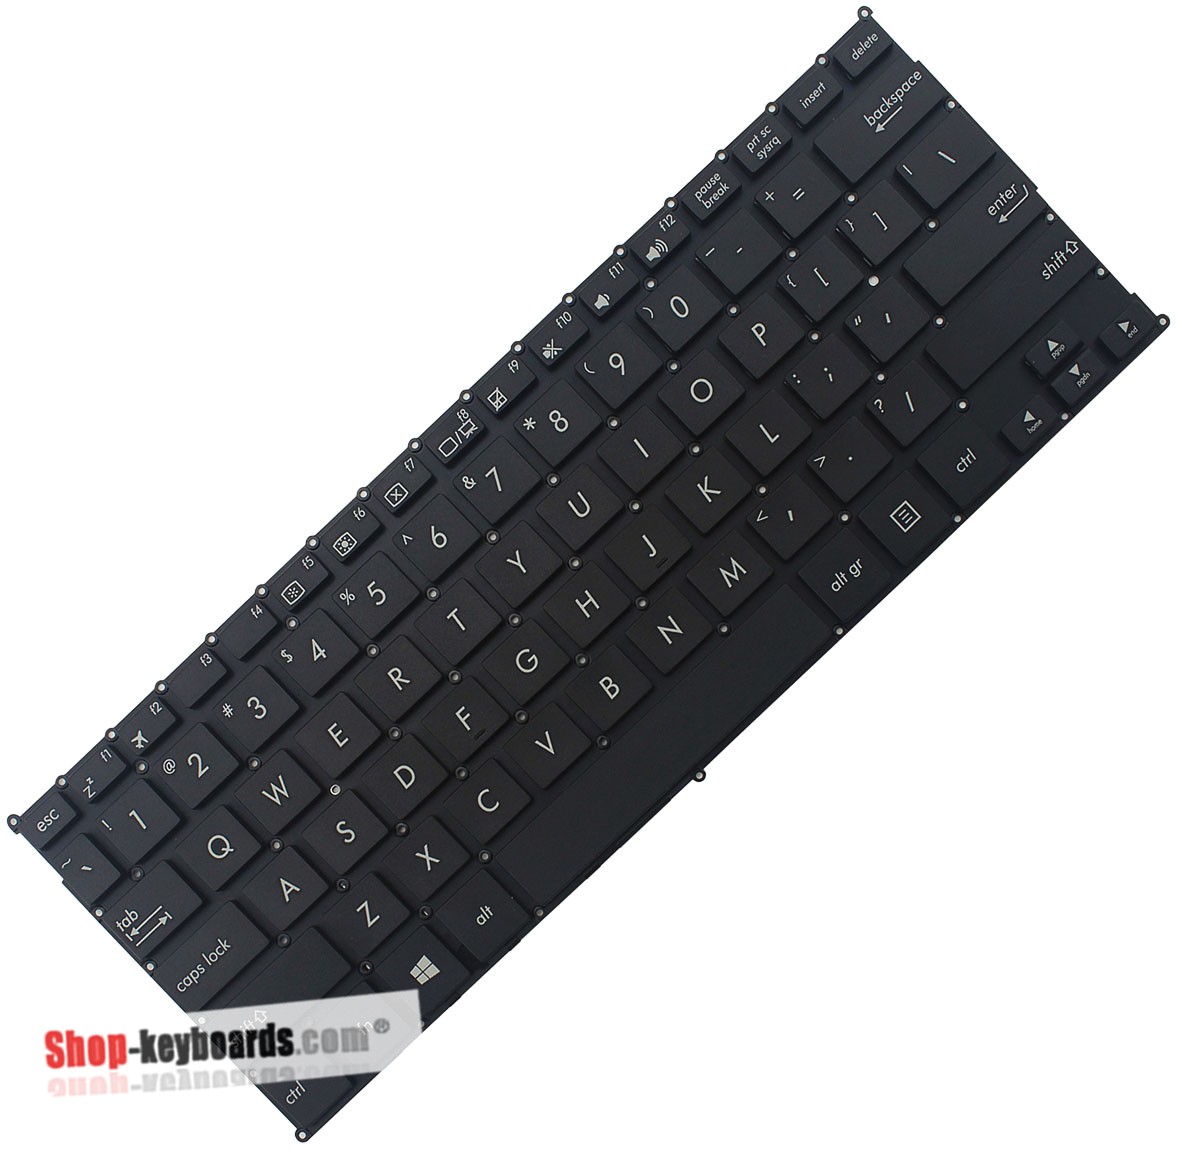 Asus 0KNL0-1123IT00 Keyboard replacement